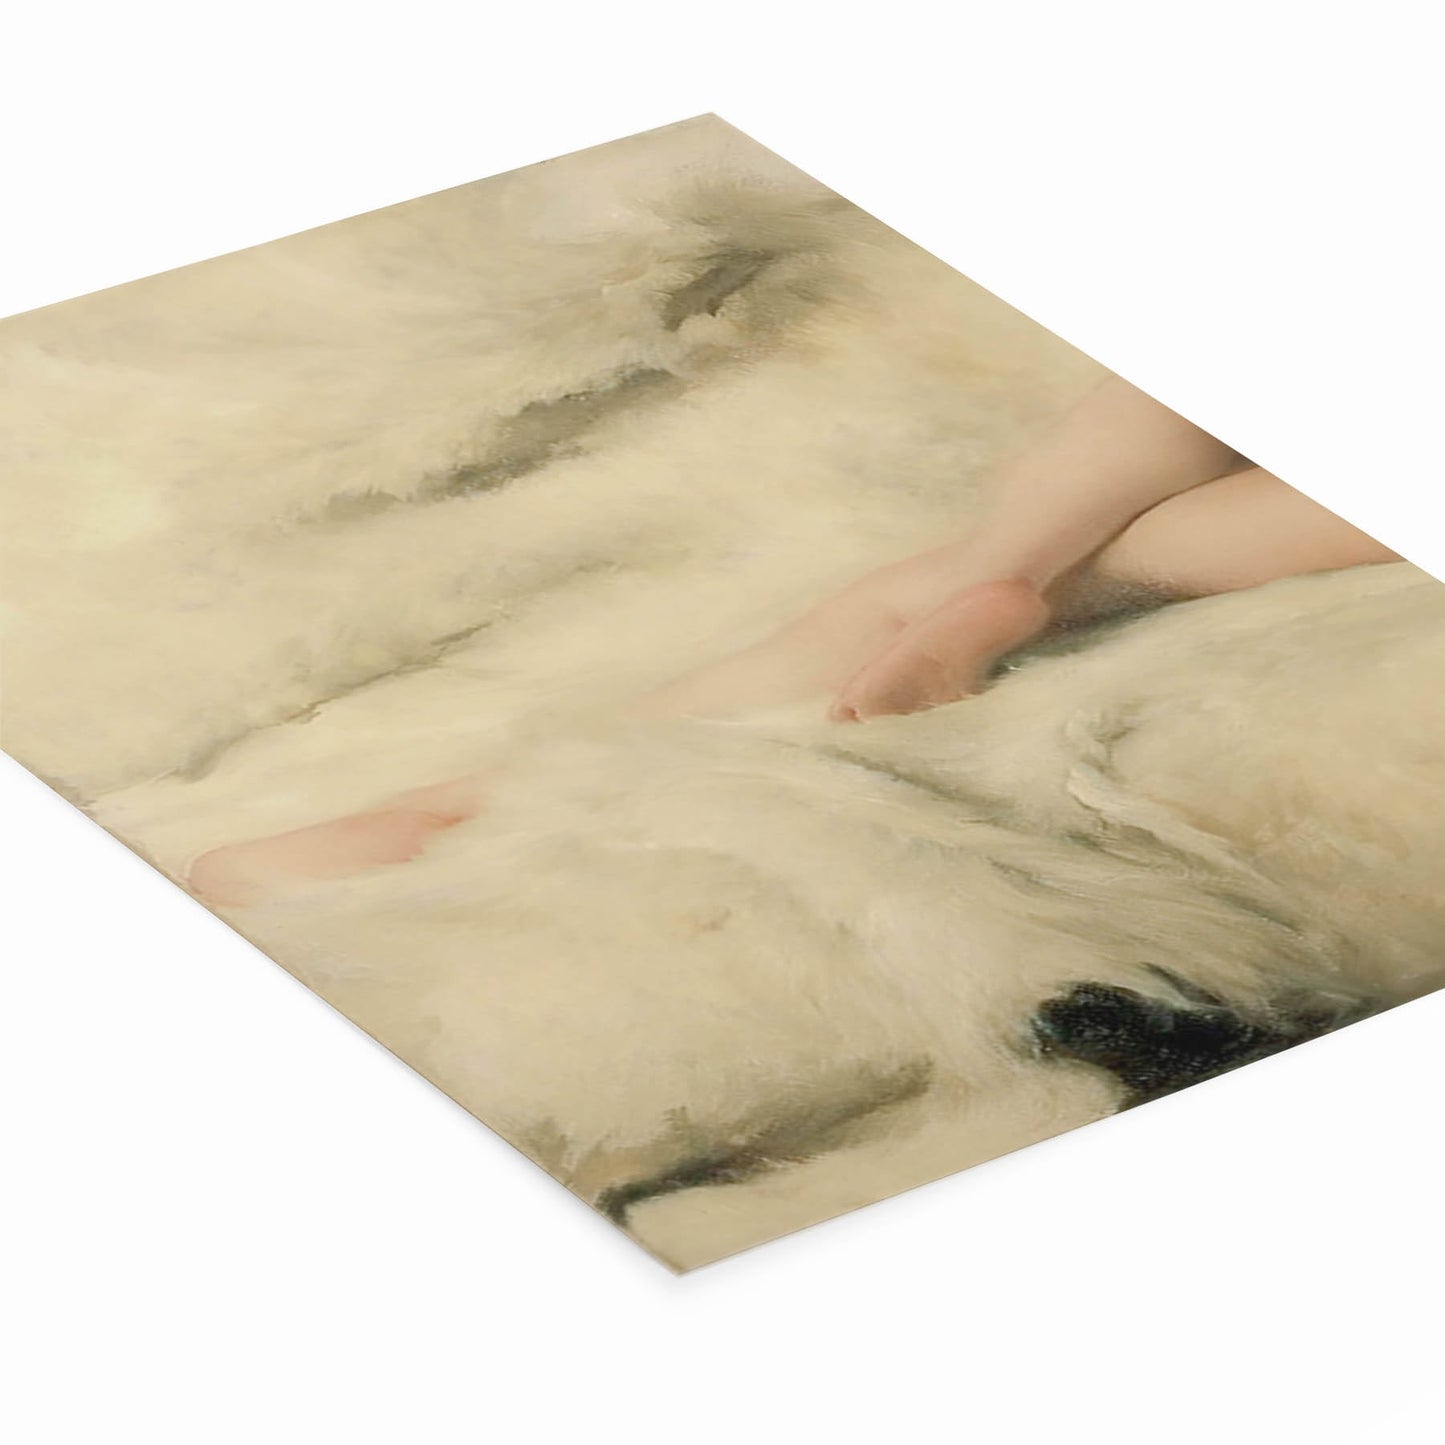 Womans Legs on a White Fur Blanket Painting Laying Flat on a White Background